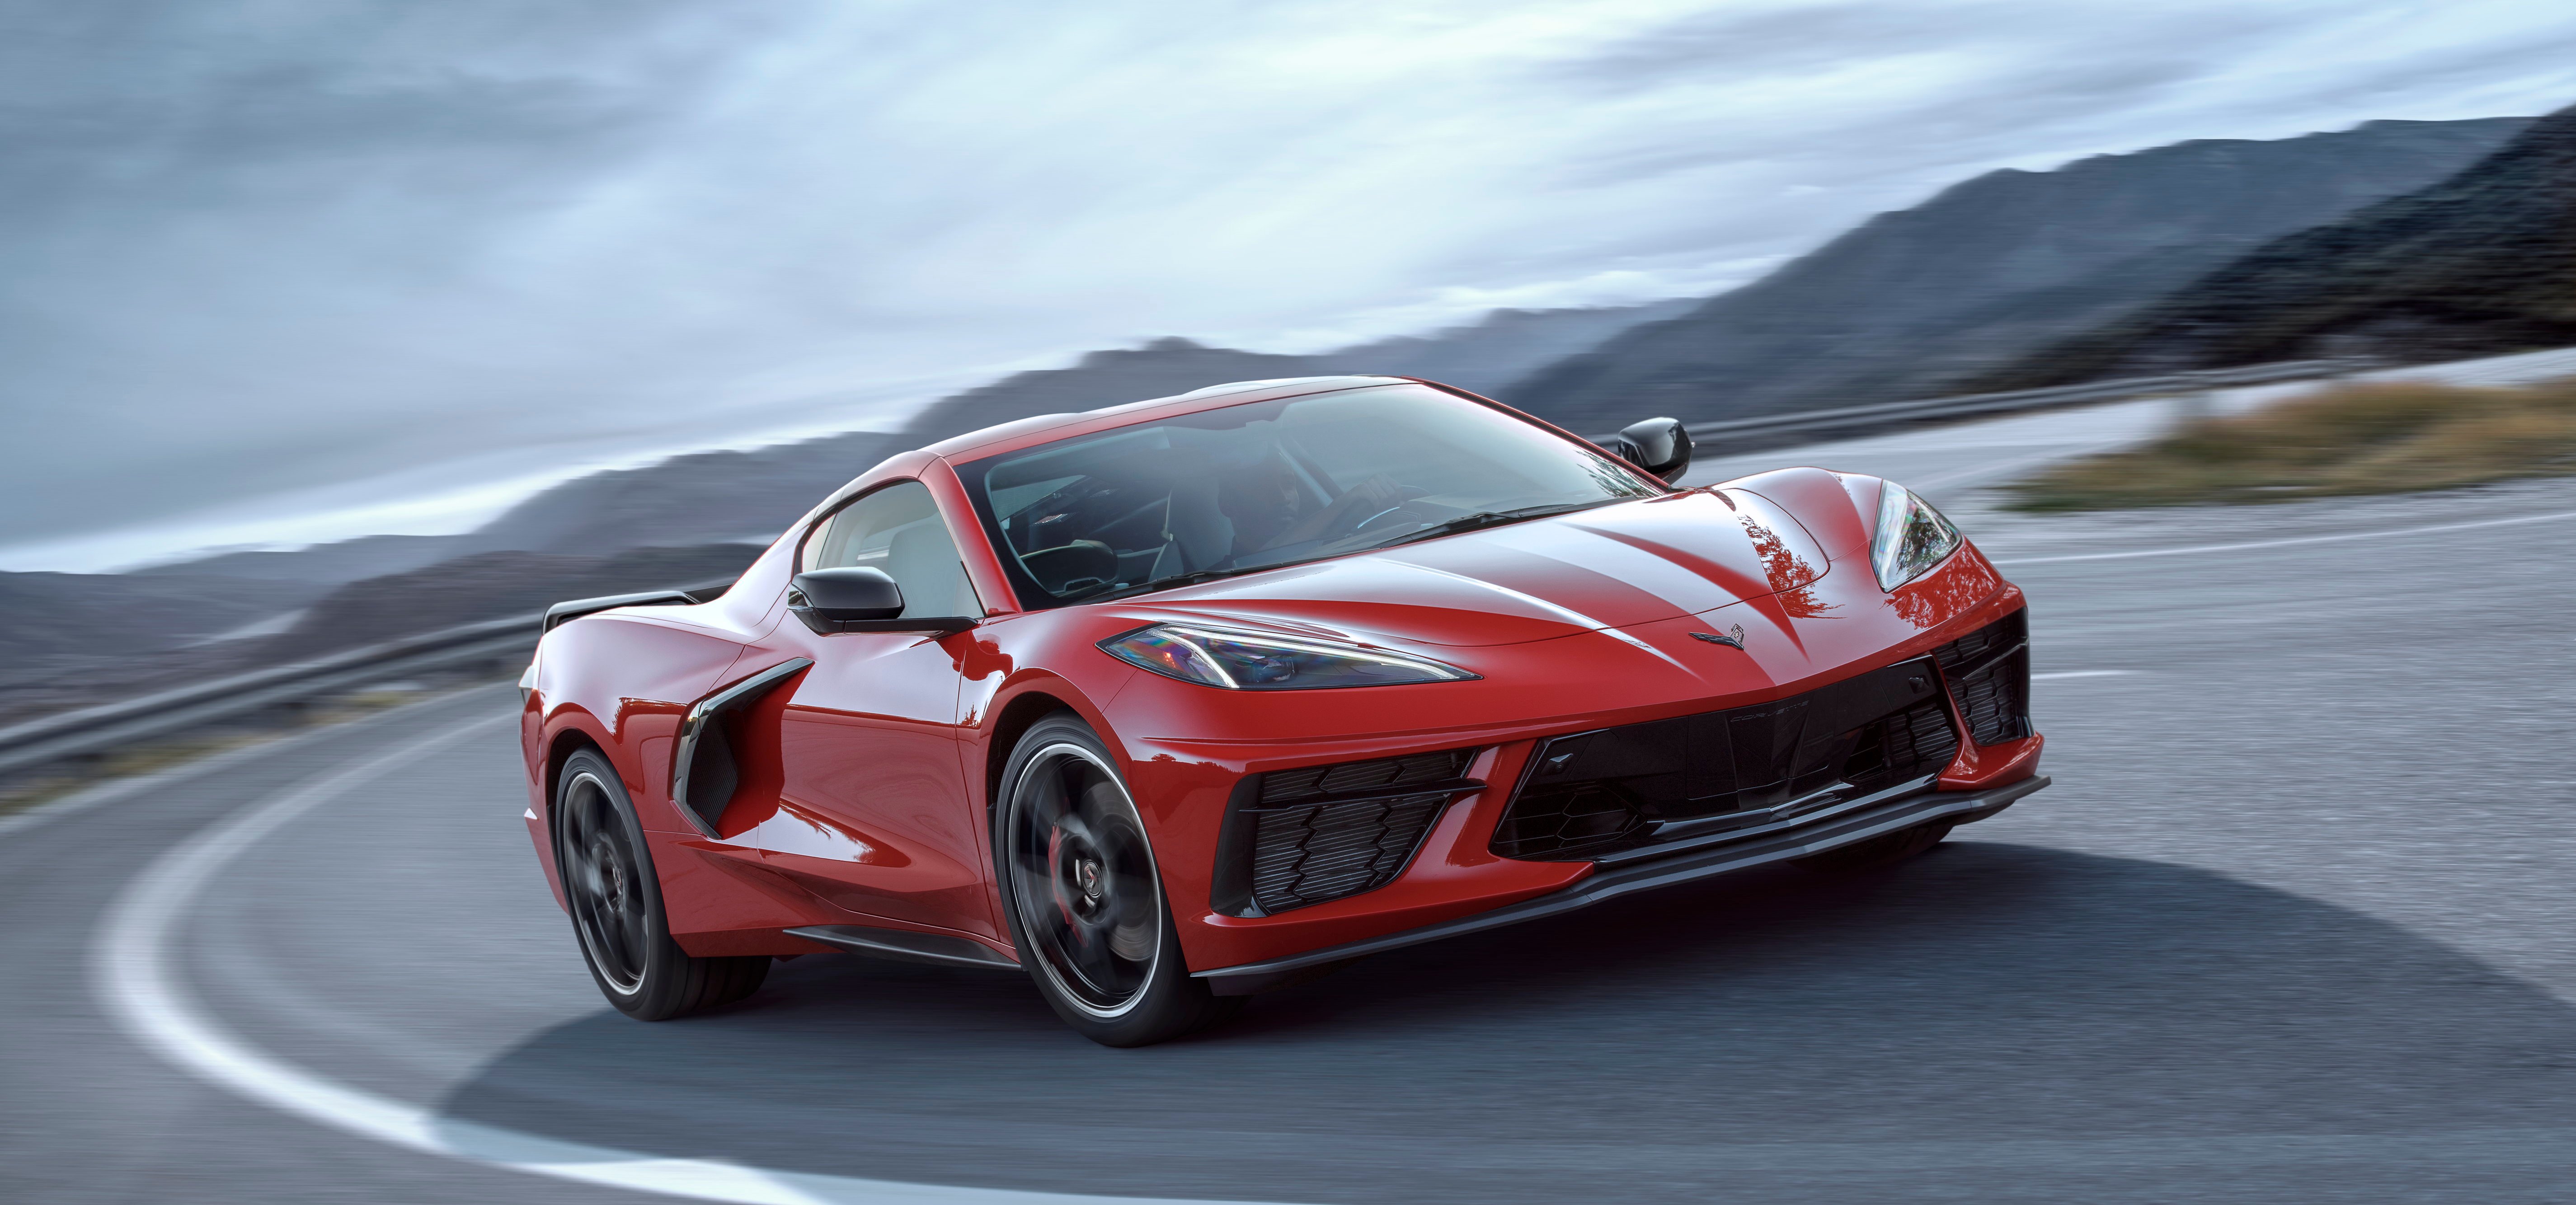 Chevrolet Corvette: Latest News, Reviews, Specifications, Prices